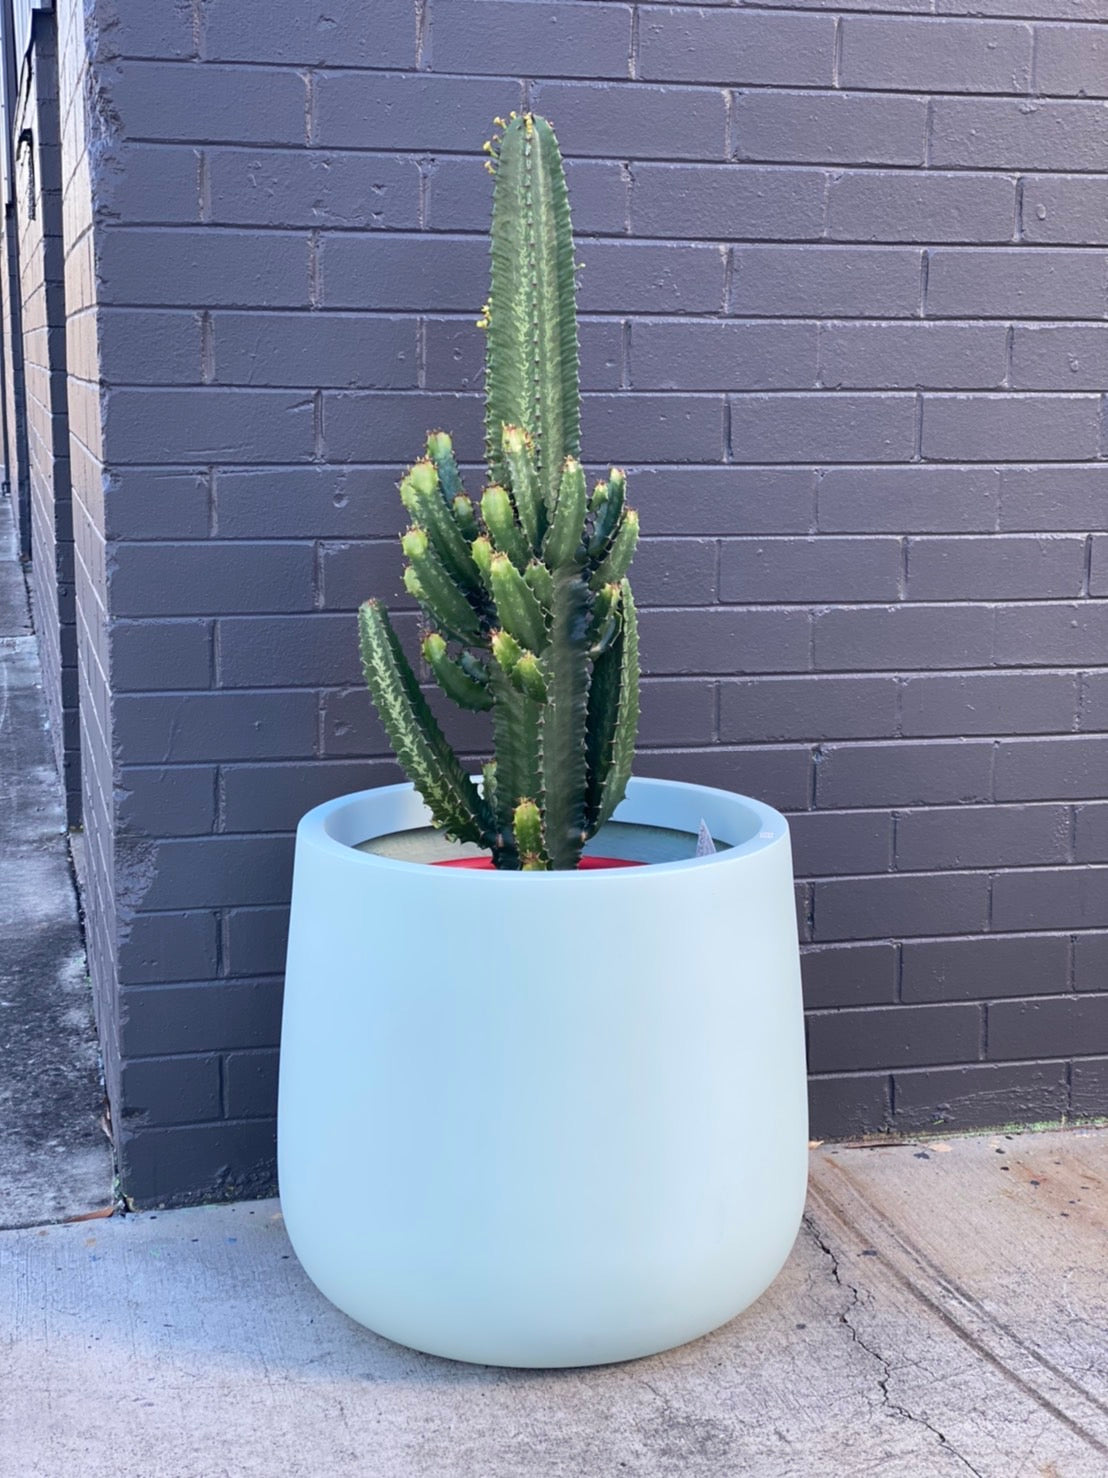 Cowboy Cactus 🌵 280mm&amp;400mm (Pickup/Delivery)